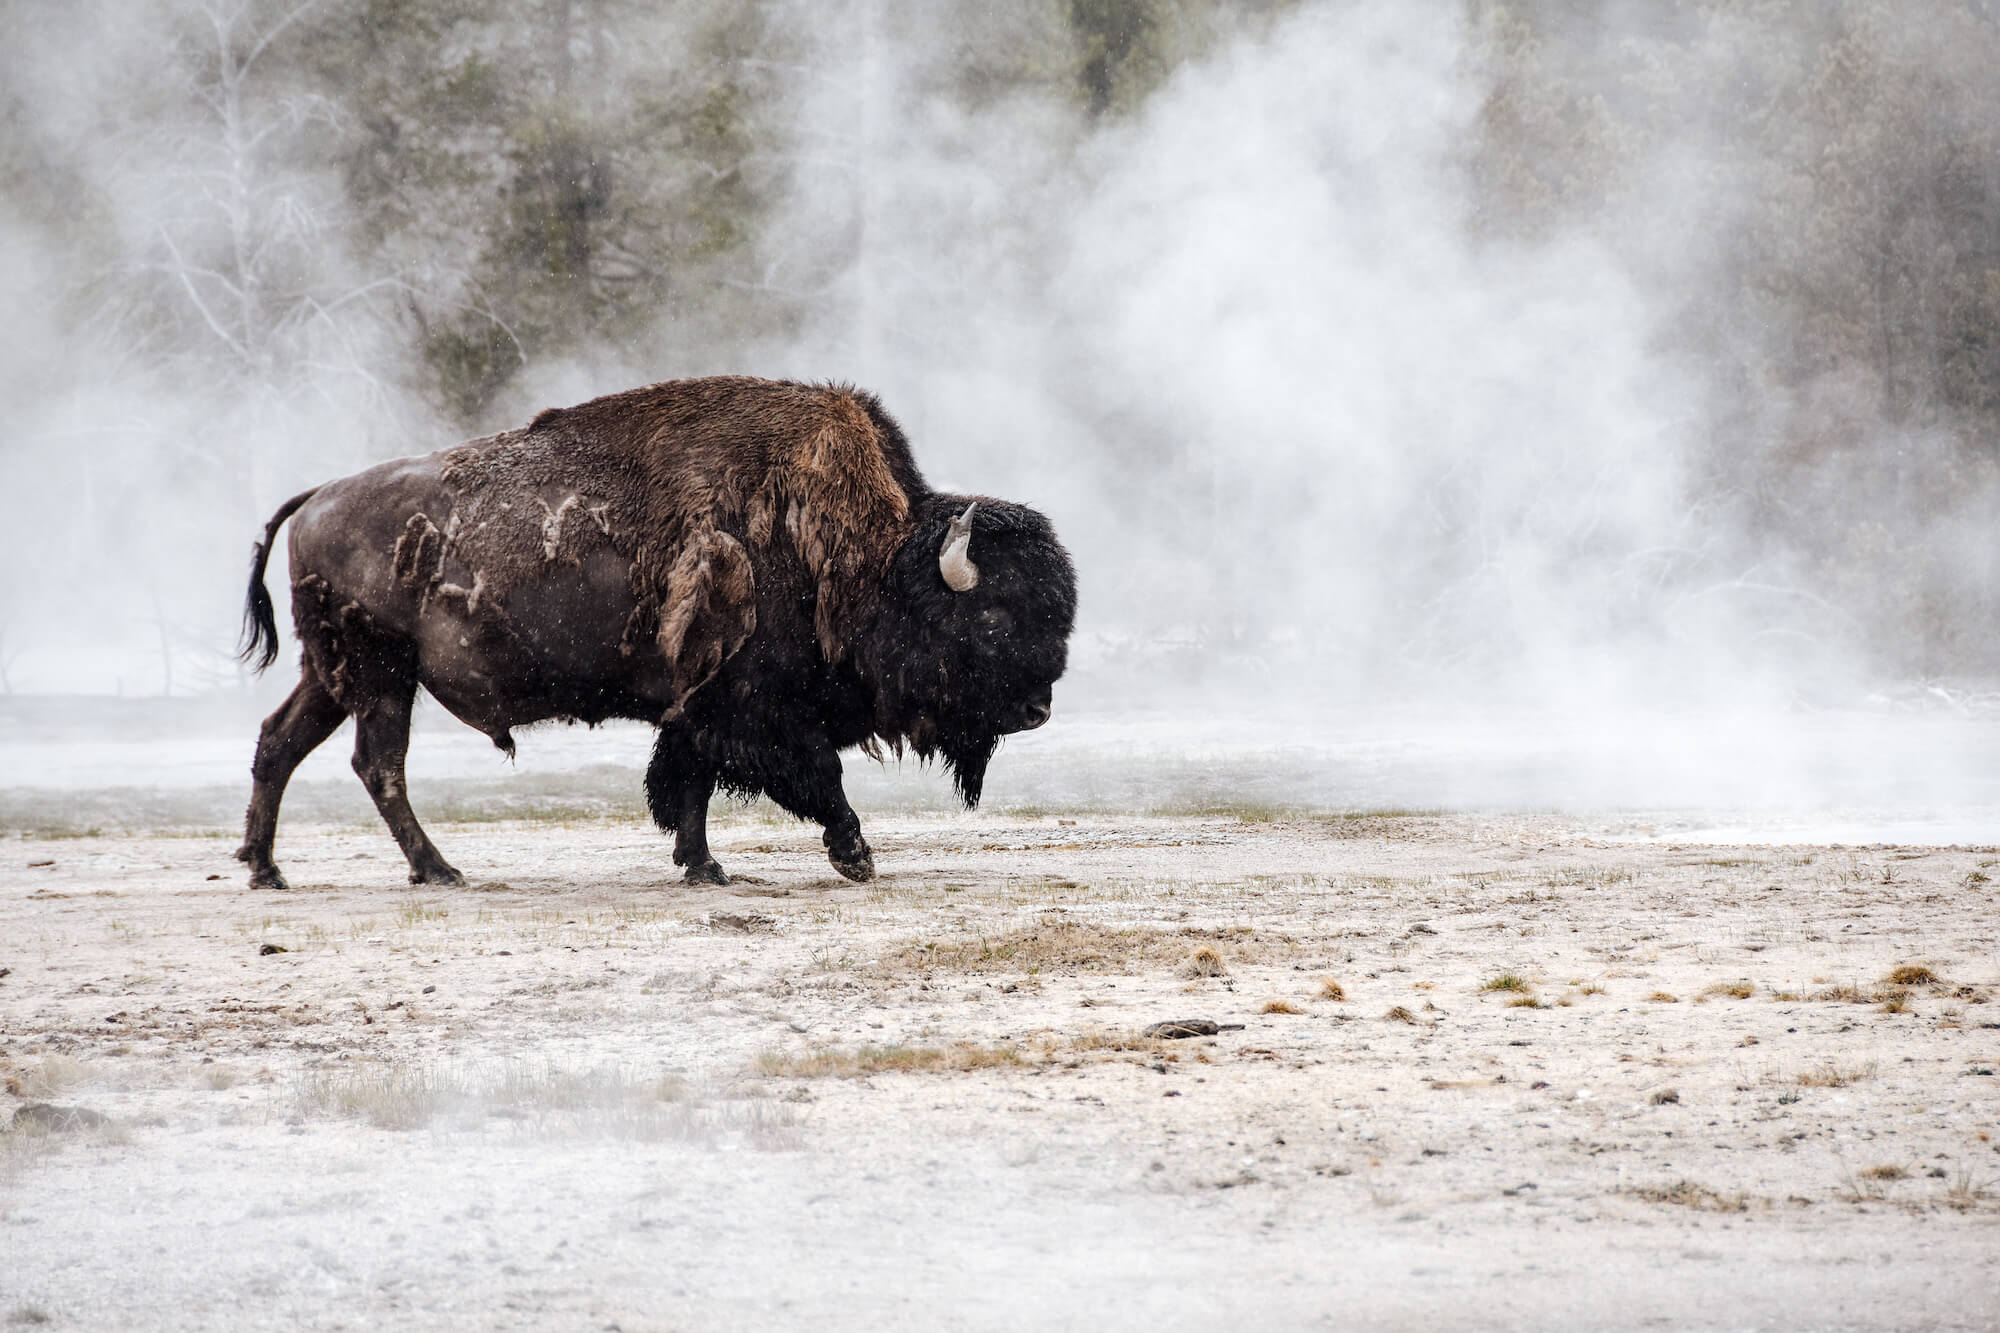 Les bisons à Yellowstone